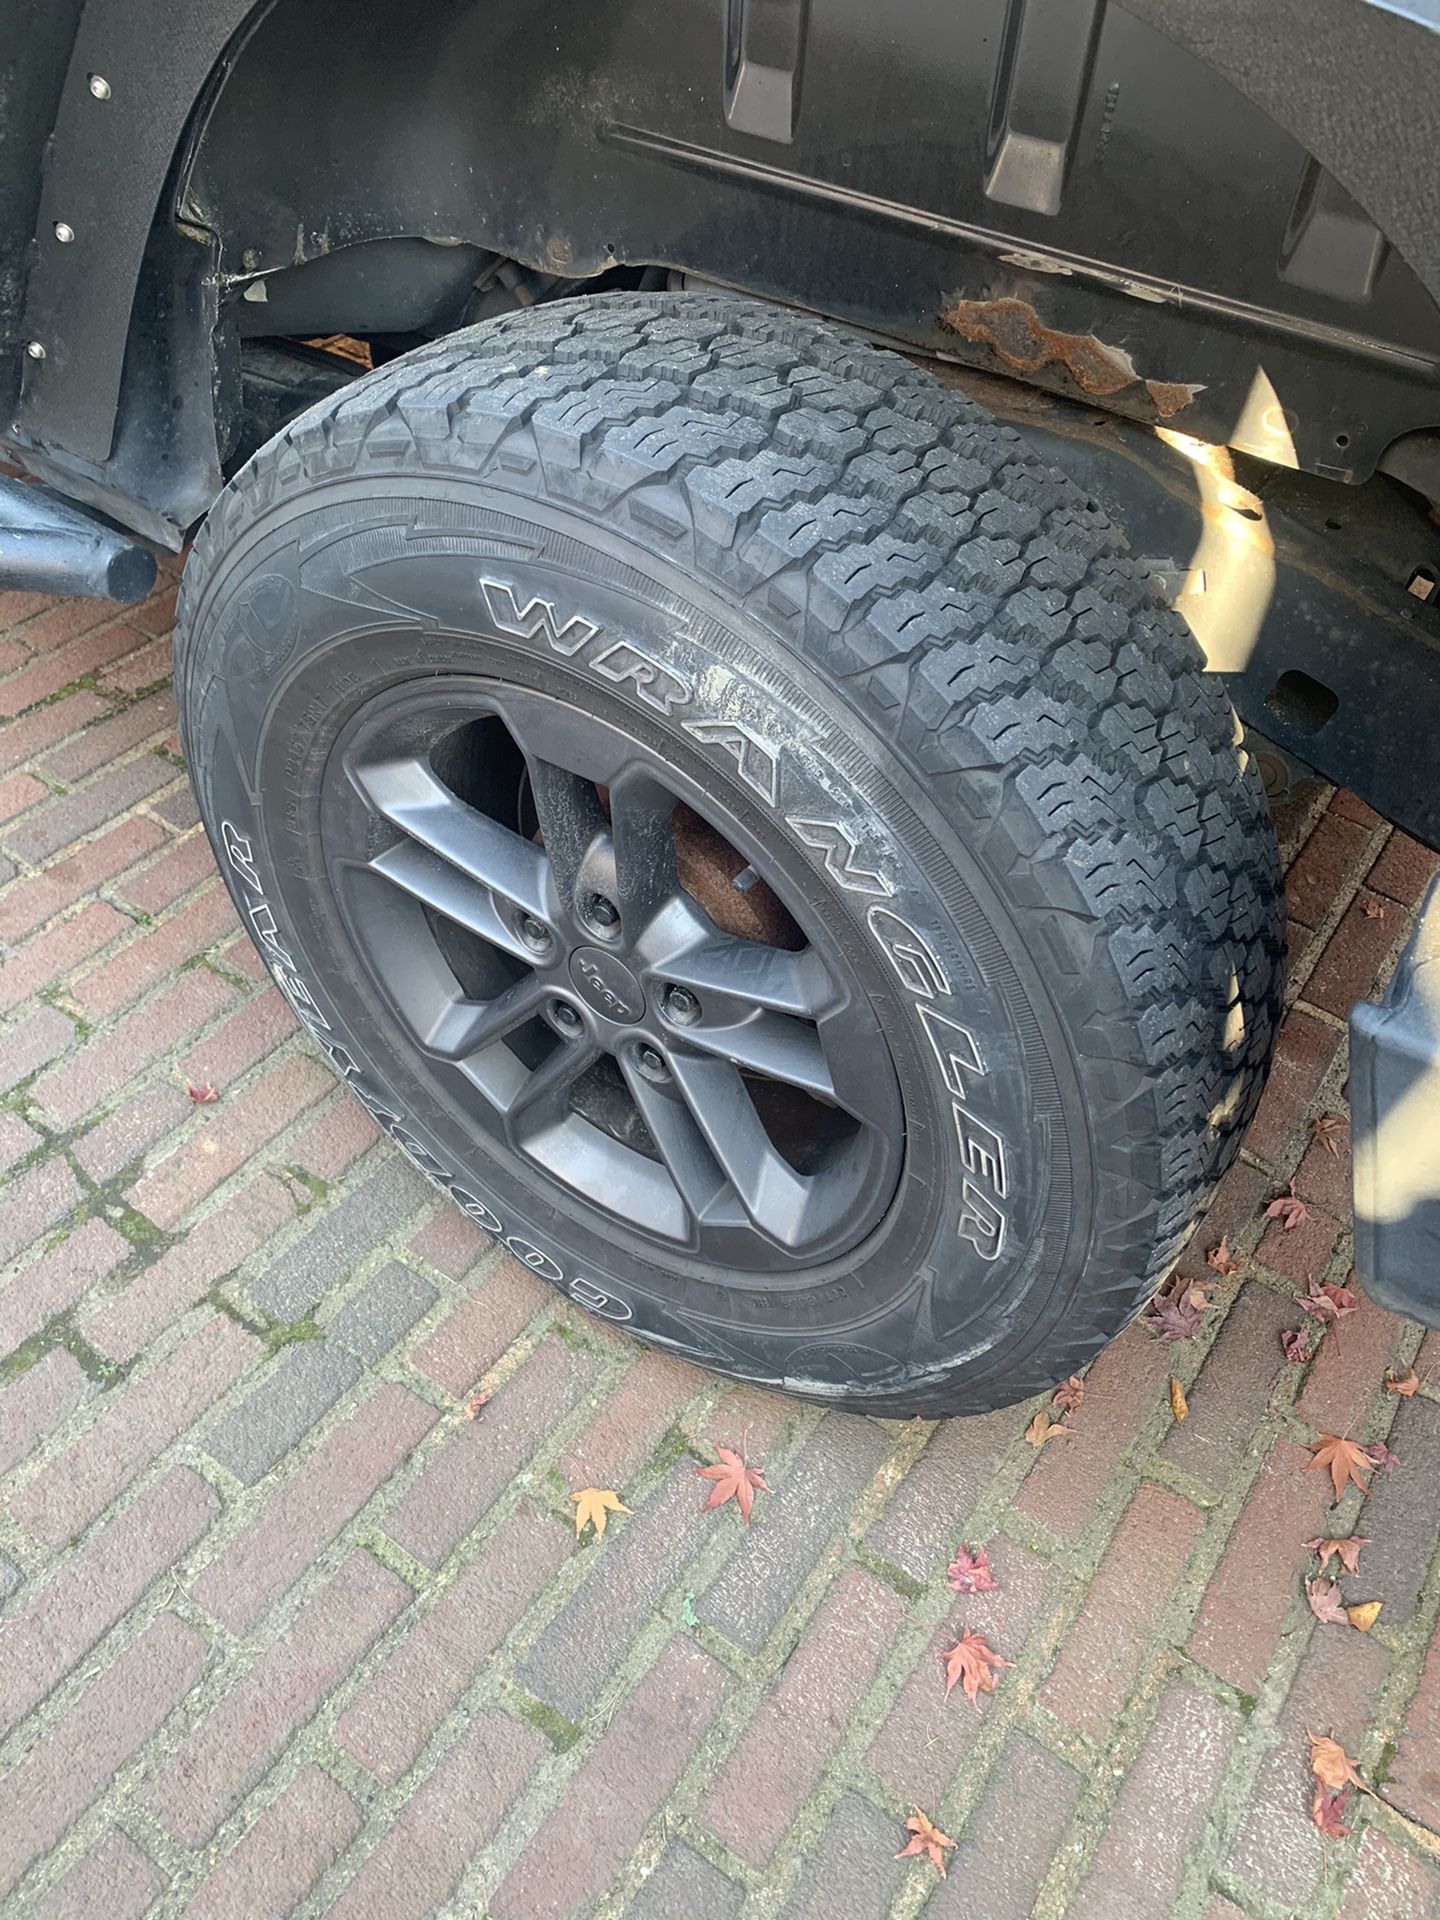 Jeep Wrangler Wheels and Tires.